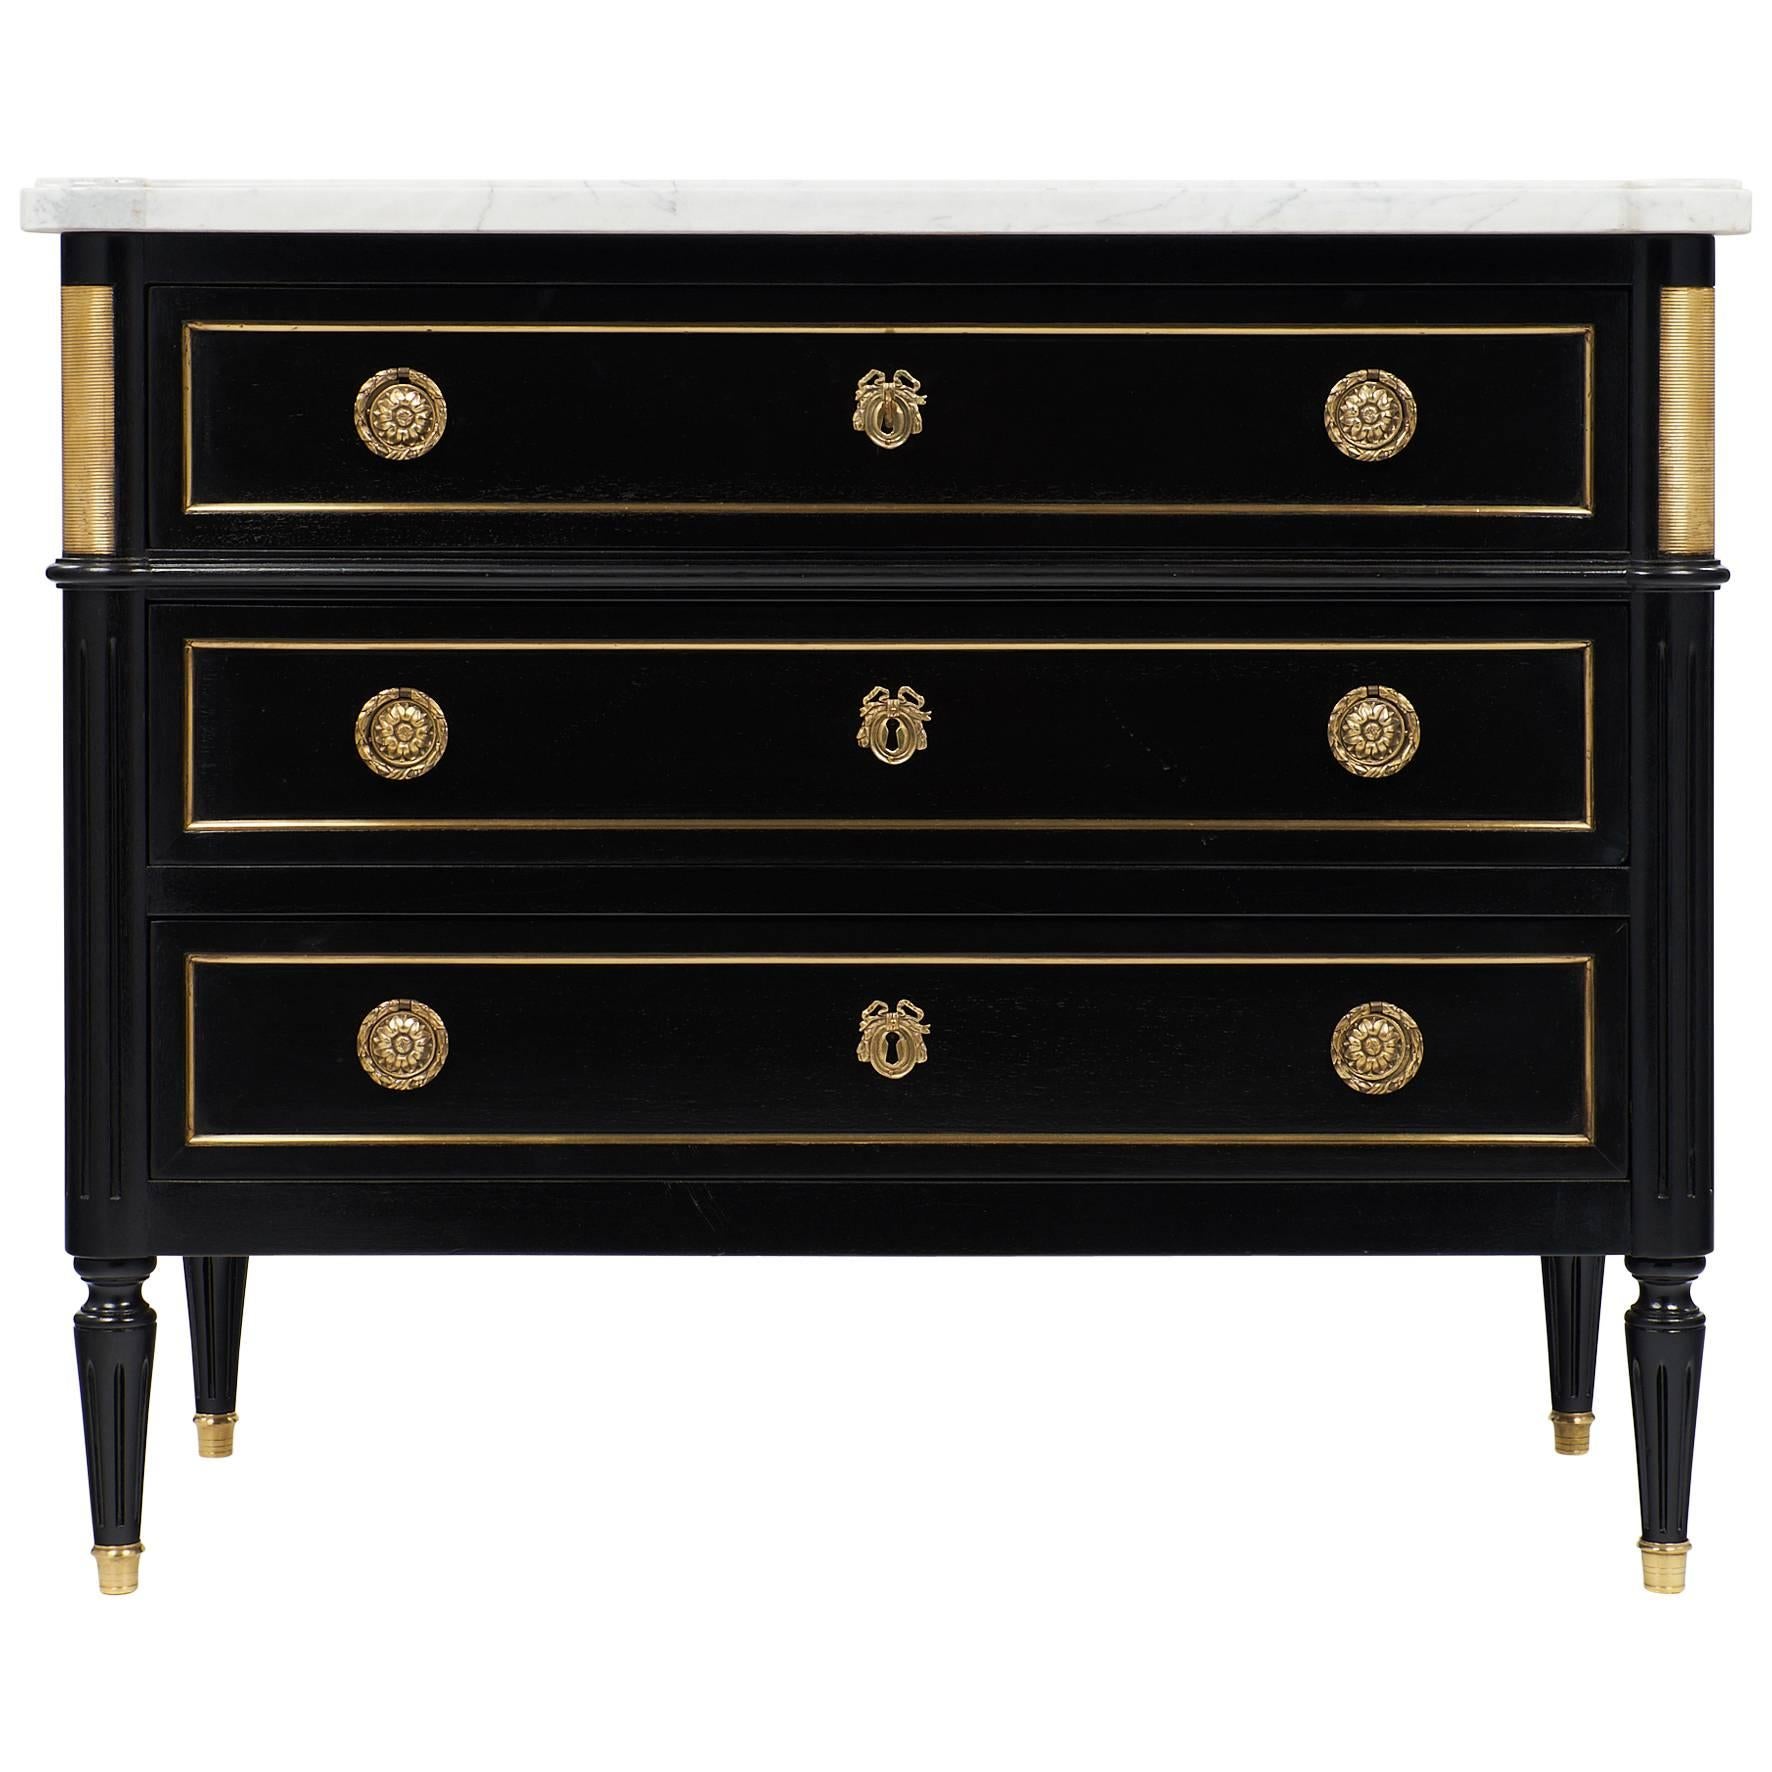 Antique French Louis XVI Style Ebonized Chest of Drawers